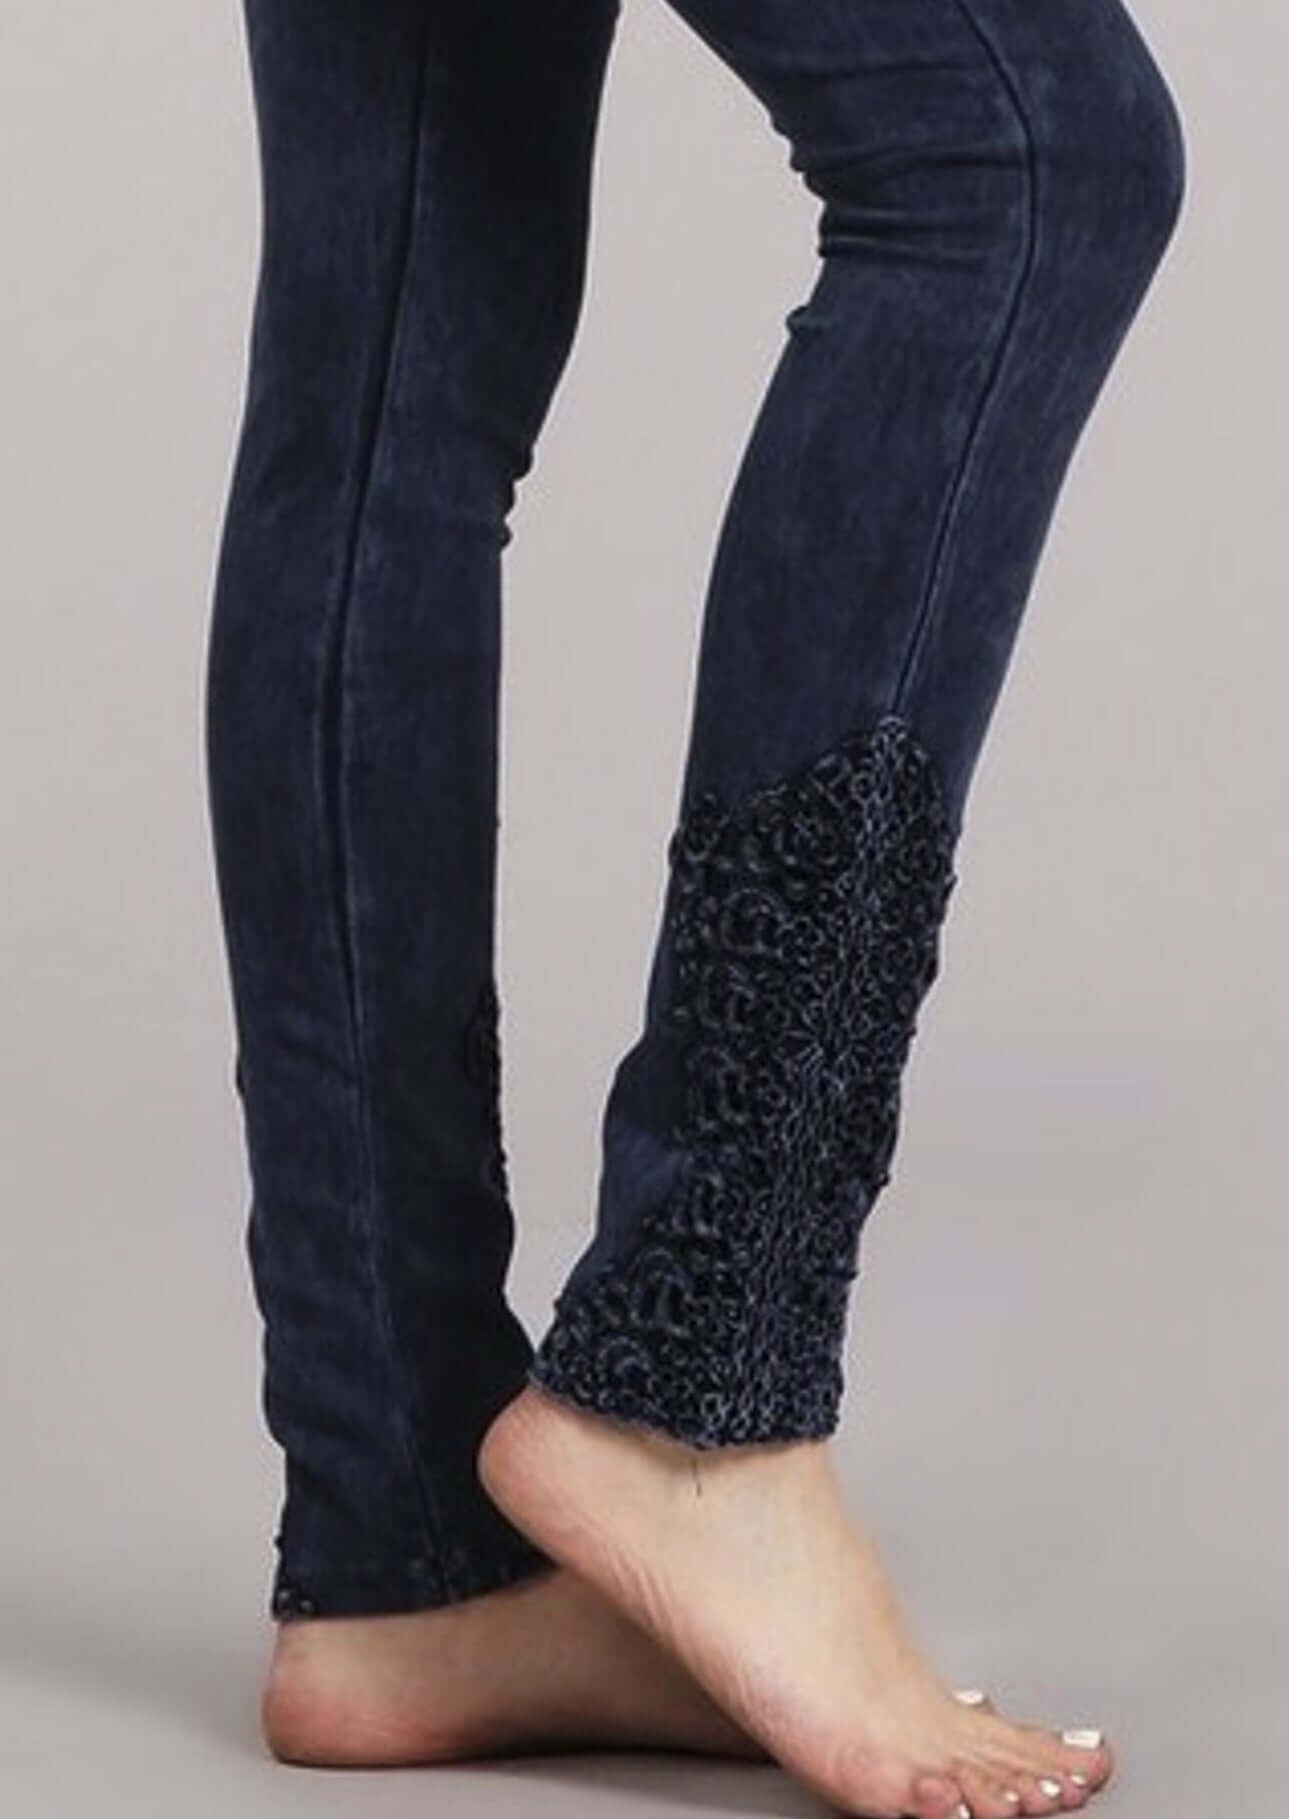 Chatoyant Mineral Washed Jeggings with Crochet Ankle Detail Hem Style# C30396 | Women's Fashion Clothing made in USA | Classy Cozy Cool Boutique